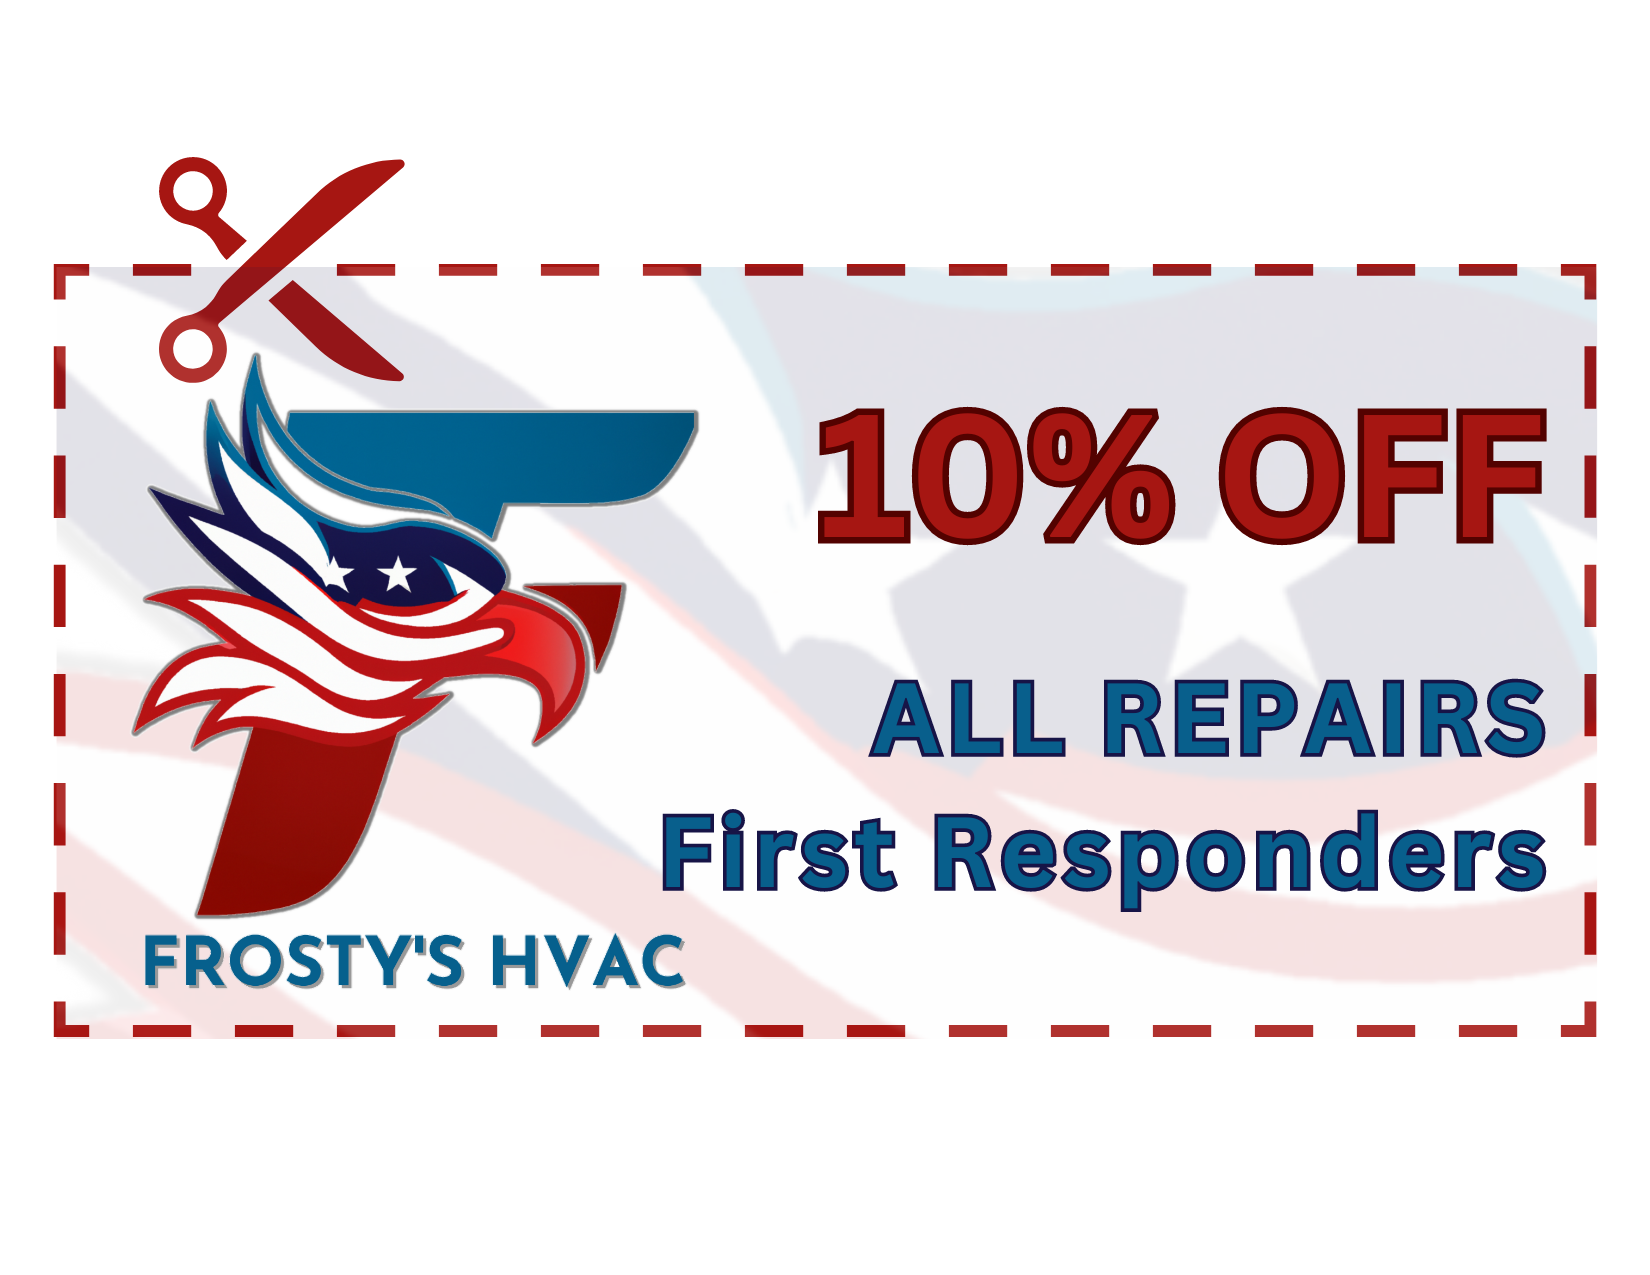 First responders air conditioning discount